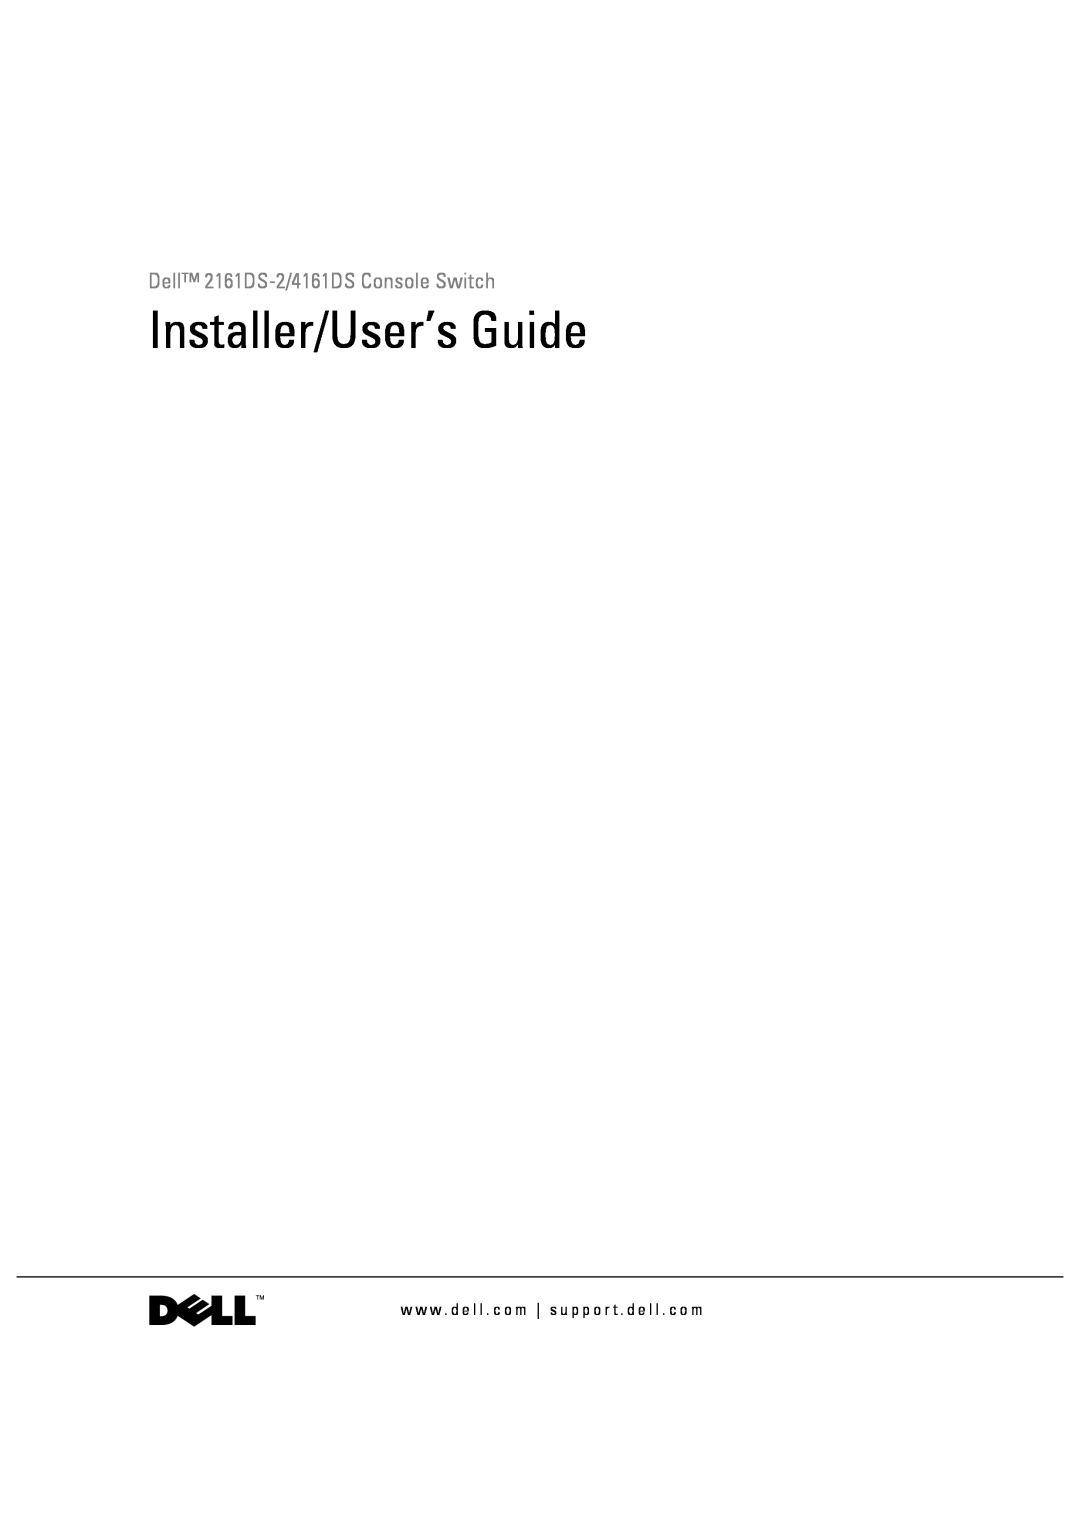 Dell manual Installer/User’s Guide, Dell 2161DS-2/4161DS Console Switch 